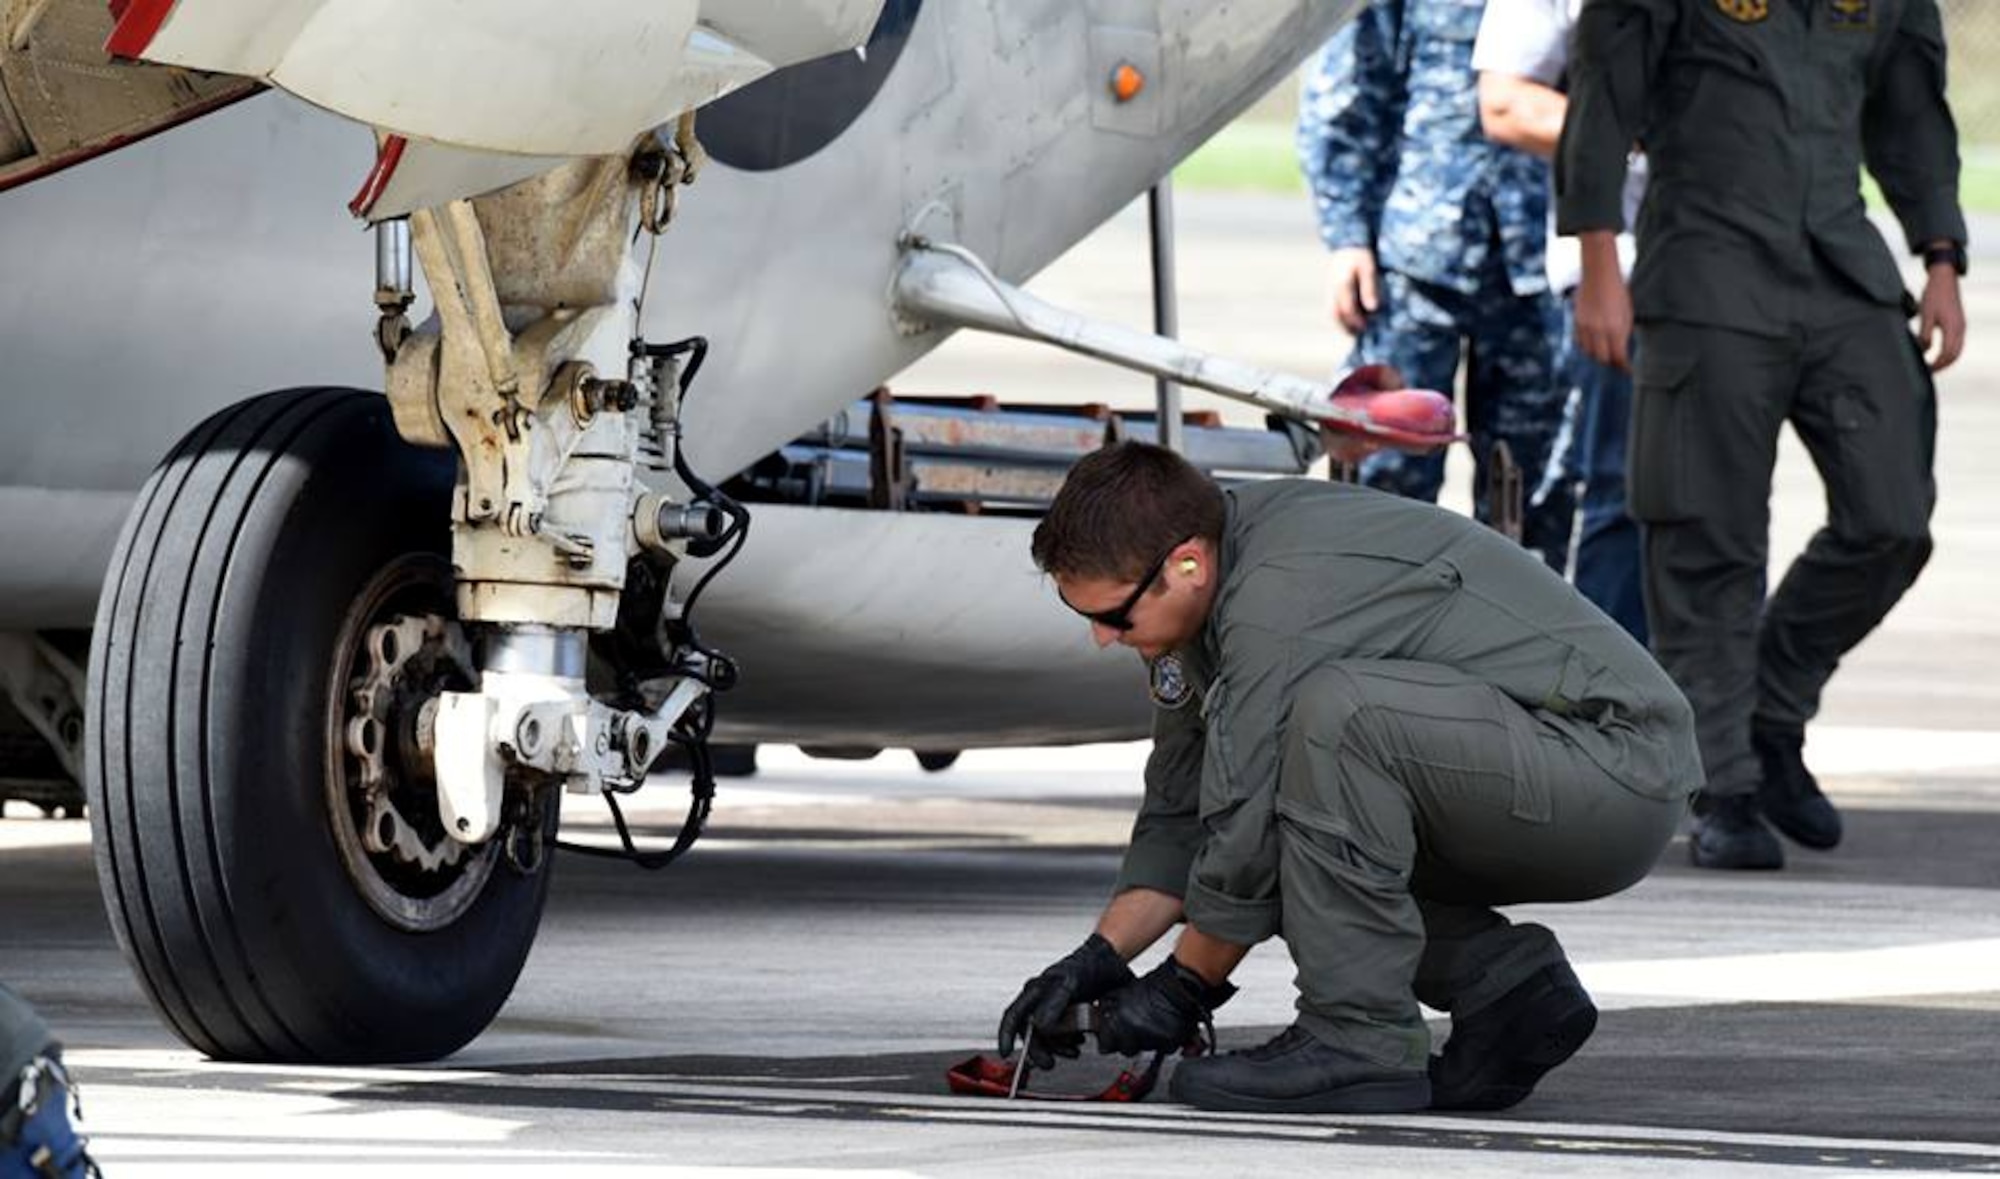 The 156th Airlift Wing, provides logistical and maintenance support to the Navy on Puerto Rico Air National Guard Base Muñiz during the week of Dec 5 thru 11, 2015. Two Navy C-2 cargo planes flew in from the USS George Washington Aircraft Carrier to drop off navy personnel, and pick up pre-ordered supplies and equipment for the vessel. The mission is to provide logistical support for the vessel’s journey from San Diego, California to South America, ending its last leg in Norfolk, Virginia. (U.S. Air National Guard photo by Tech Sgt. Efrain Sanchez)
